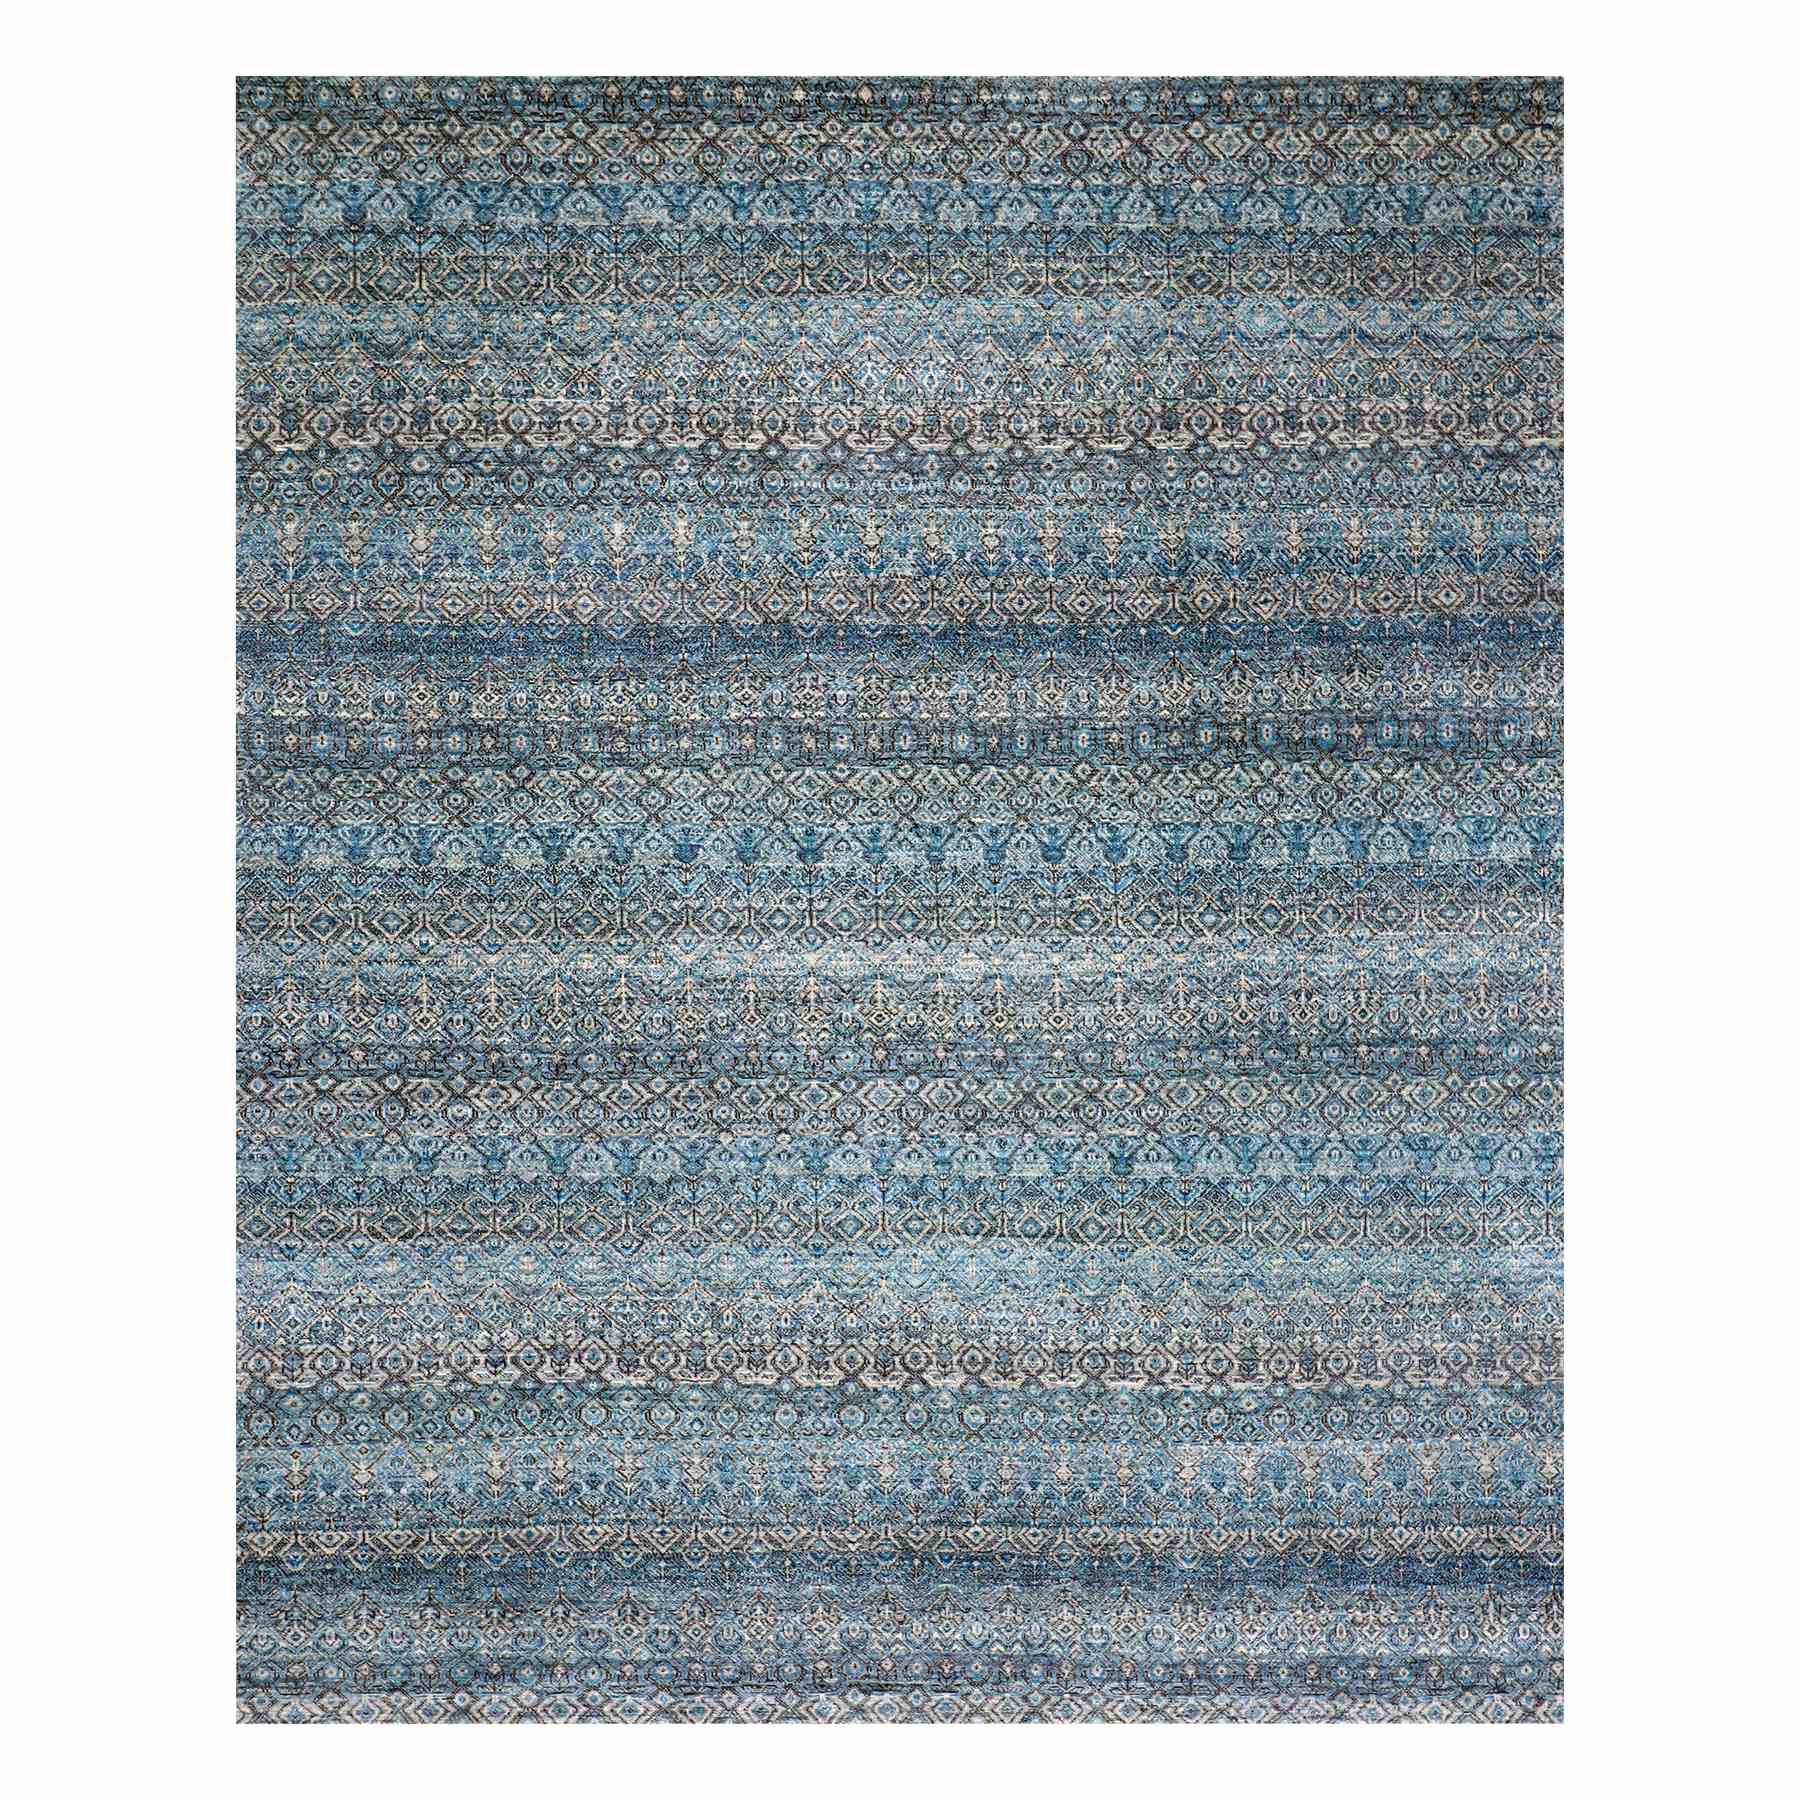  Wool Hand-Knotted Area Rug 8'0